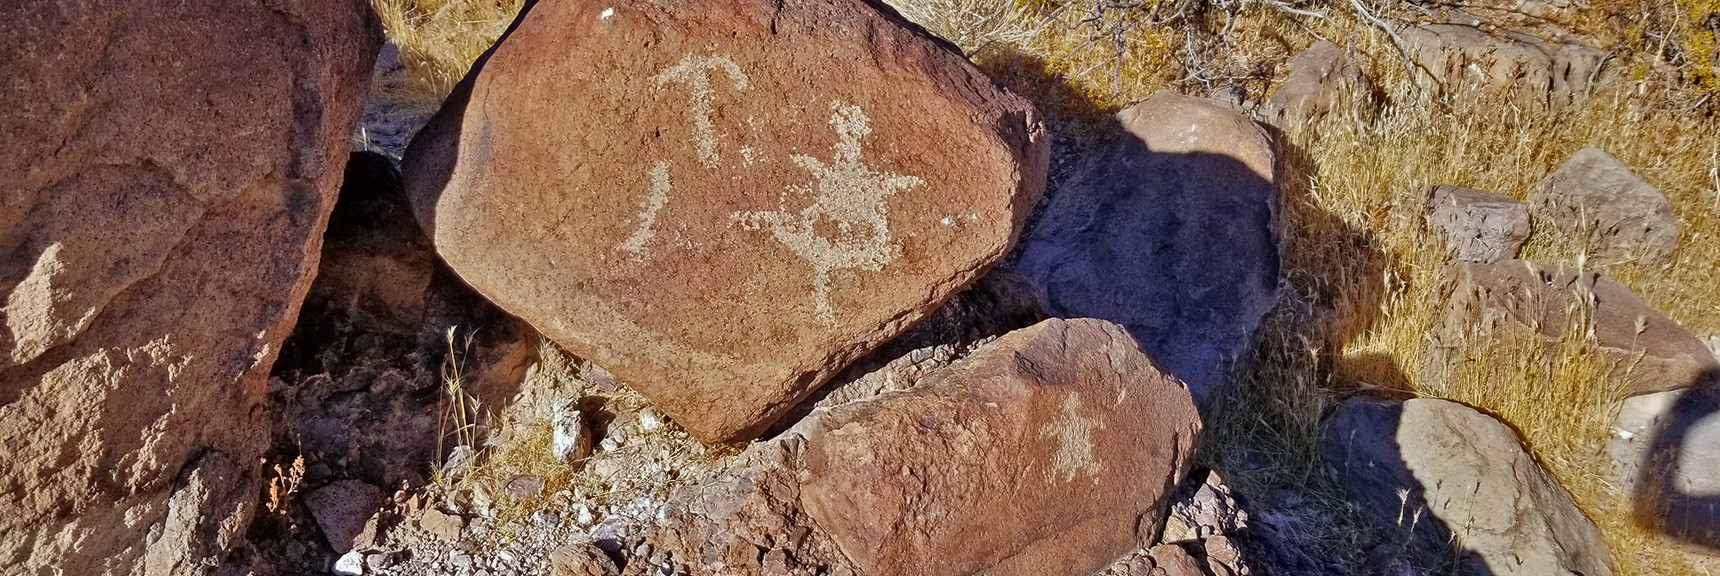 Figure Appears to Have Successfully Accomplished a Summit in Petroglyph Canyon Area | Petroglyph Canyon | Sloan Canyon National Conservation Area, Nevada